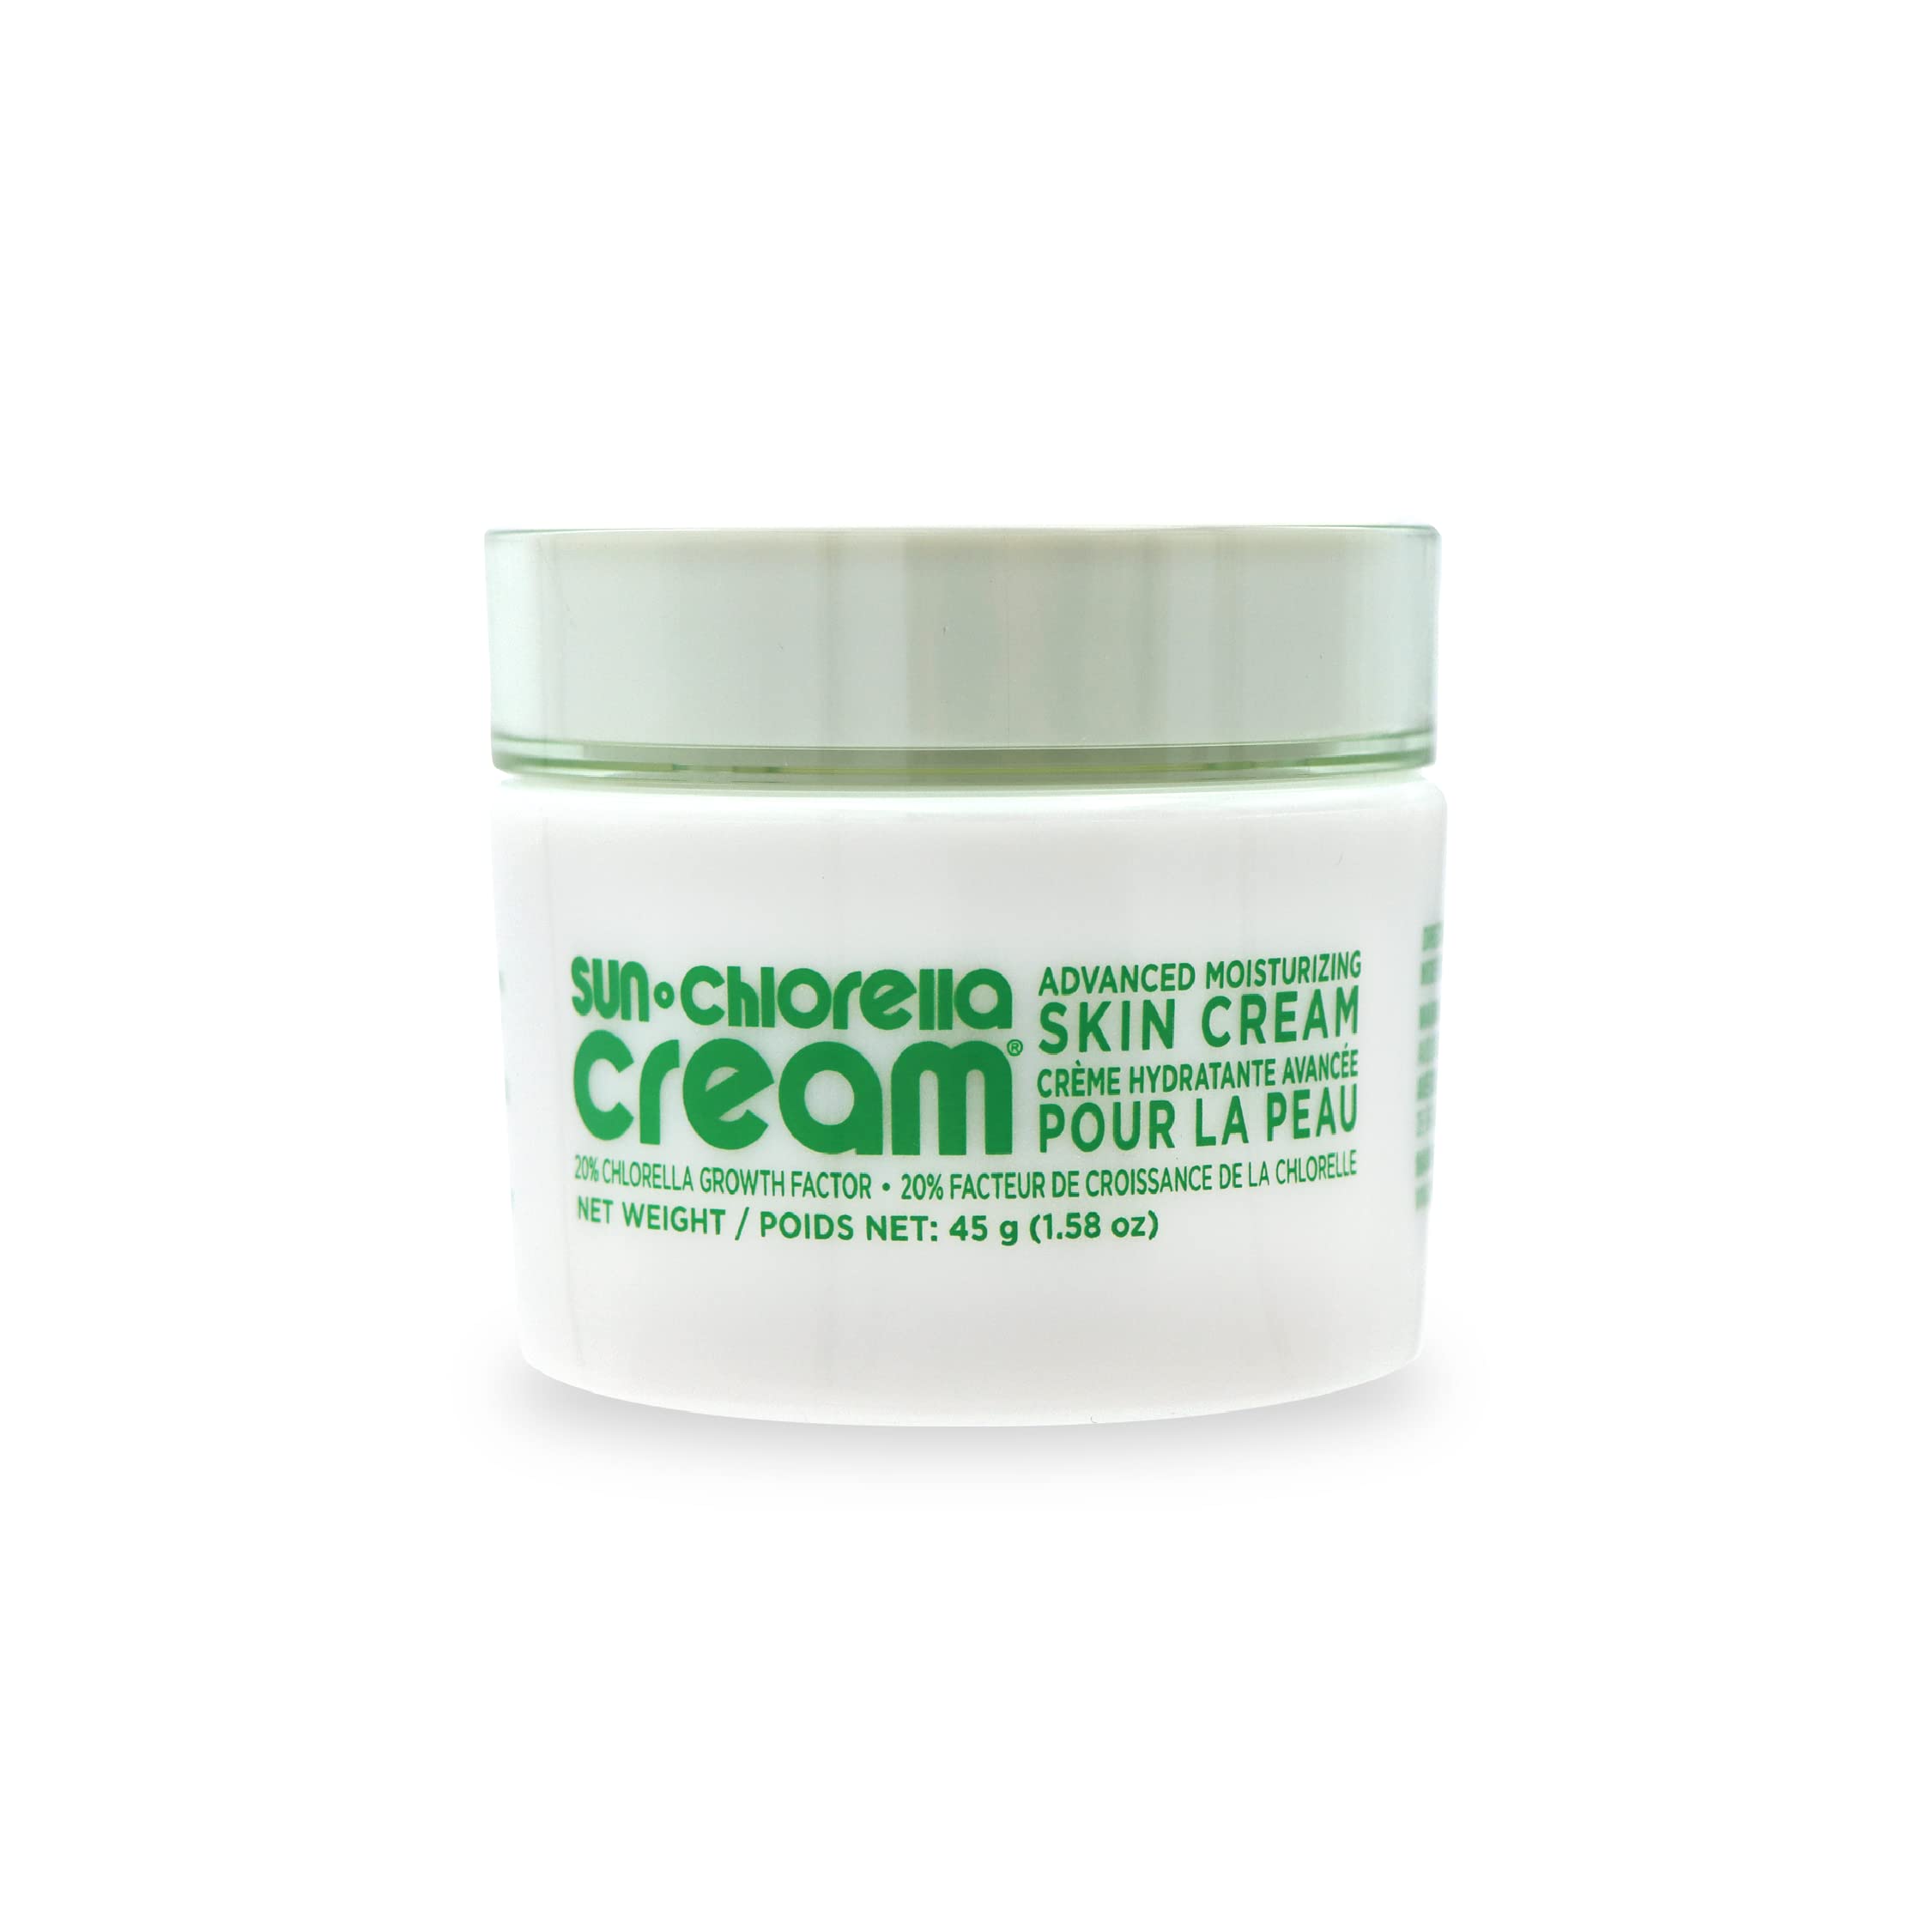 Sun Chlorella Cream Face Moisturizer Deep Hydration Boost, Natural Skin Care Helps Restore Balance & Reduce Appearance of Fine Lines & Wrinkles - Vibrant, Glowing Radiance - Paraben Free - 1.58oz